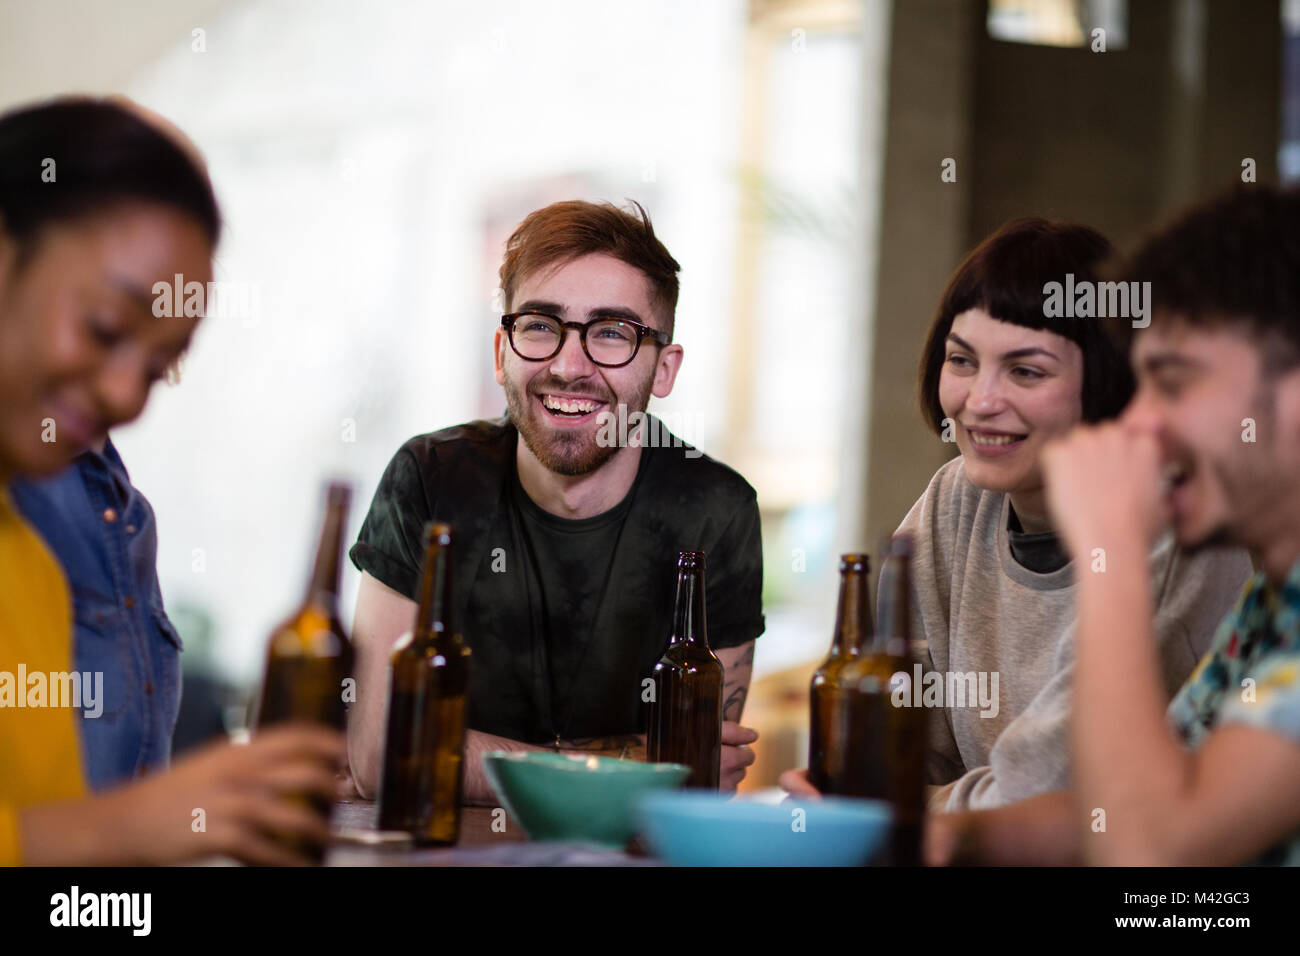 Group of friends drinking beer together Stock Photo